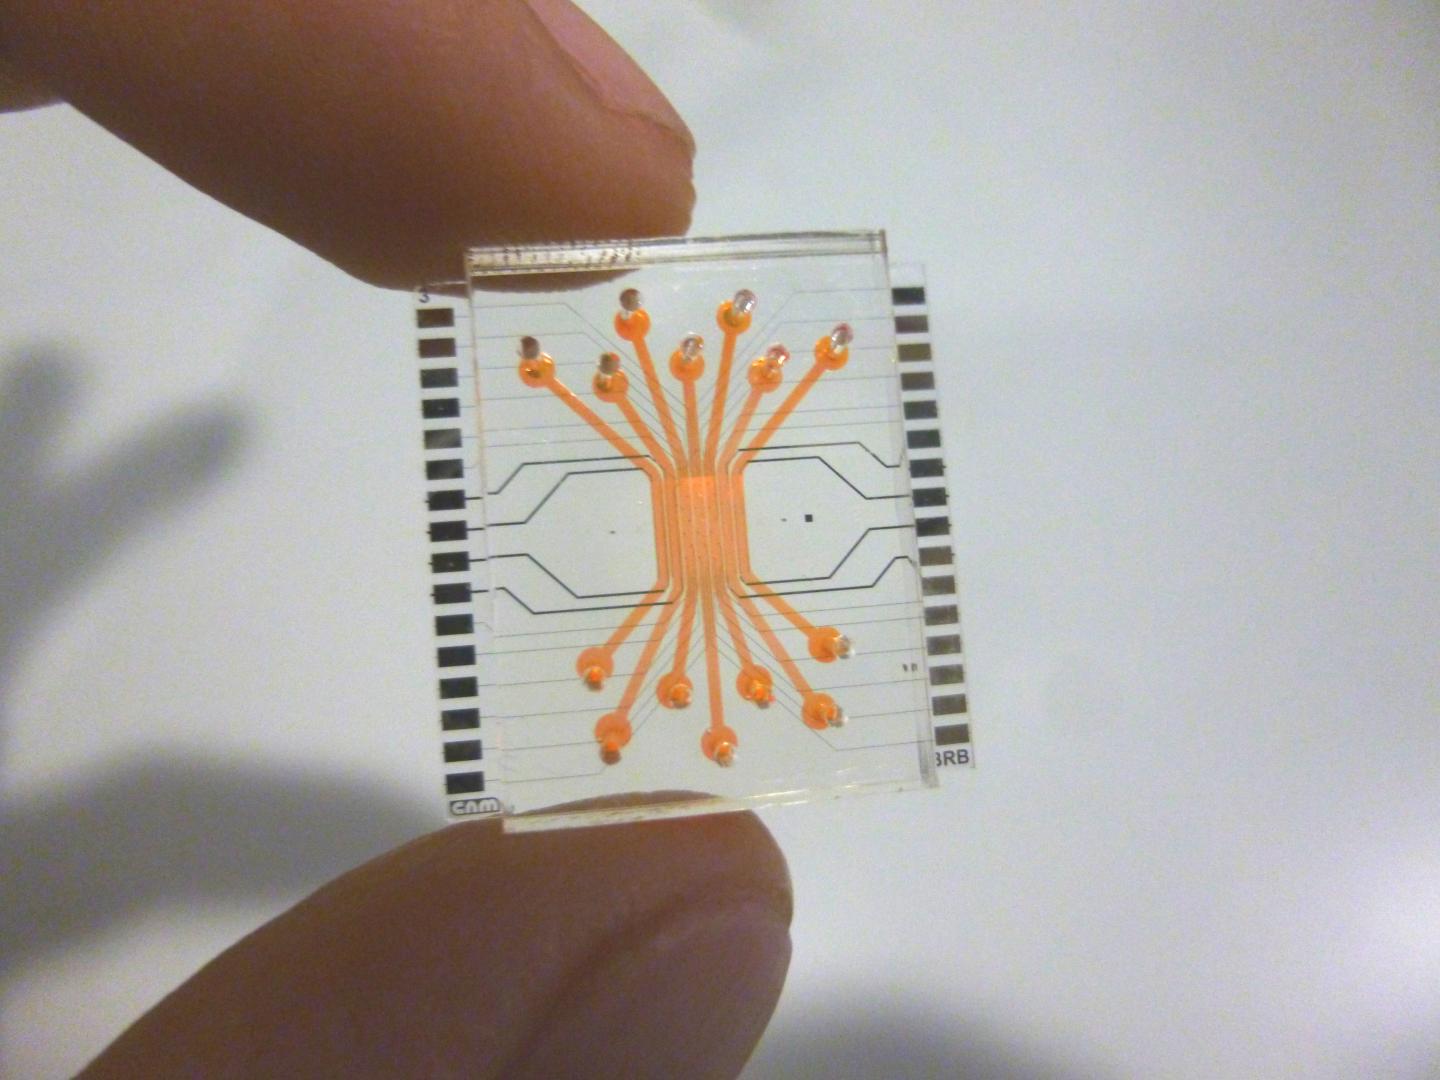 The new chip developed by Barcelona researchers. Source: José Yeste/CSIC-IMB-CNM